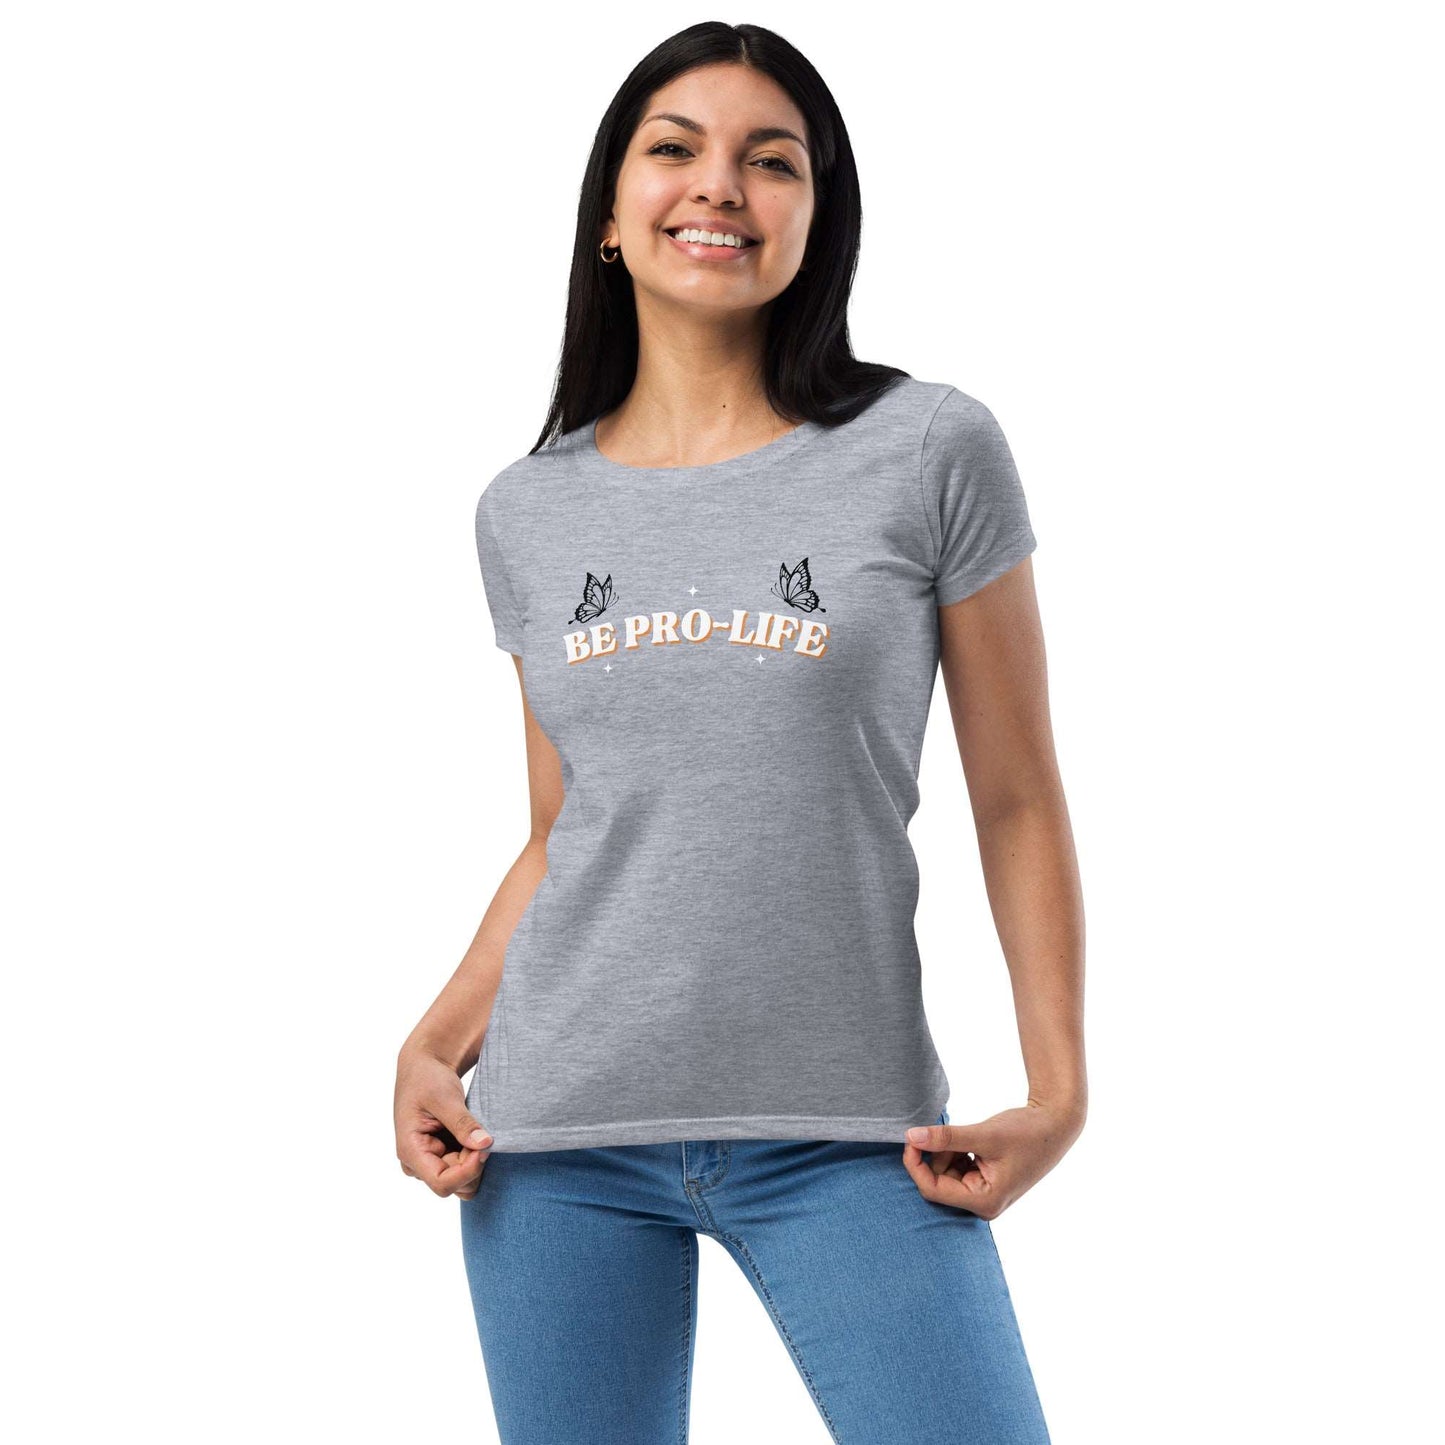 Be Pro-Life! - Women’s fitted t-shirt